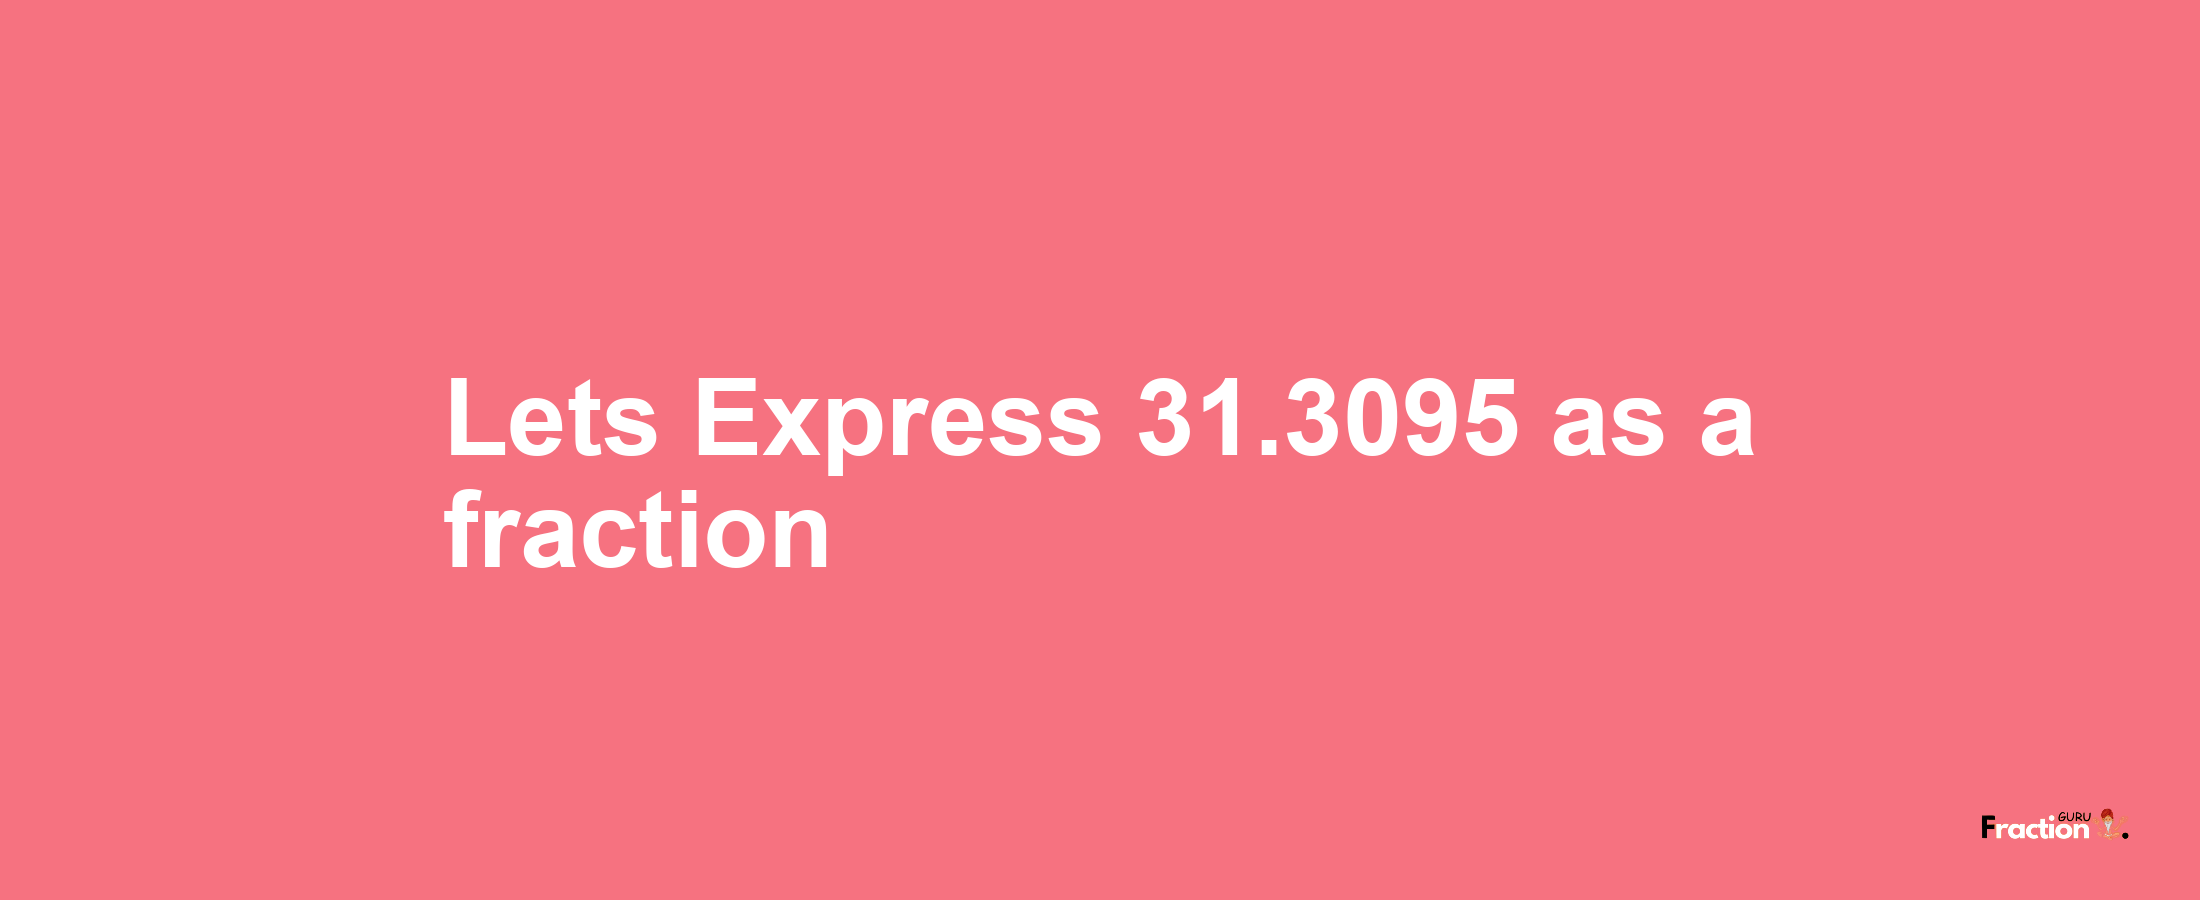 Lets Express 31.3095 as afraction